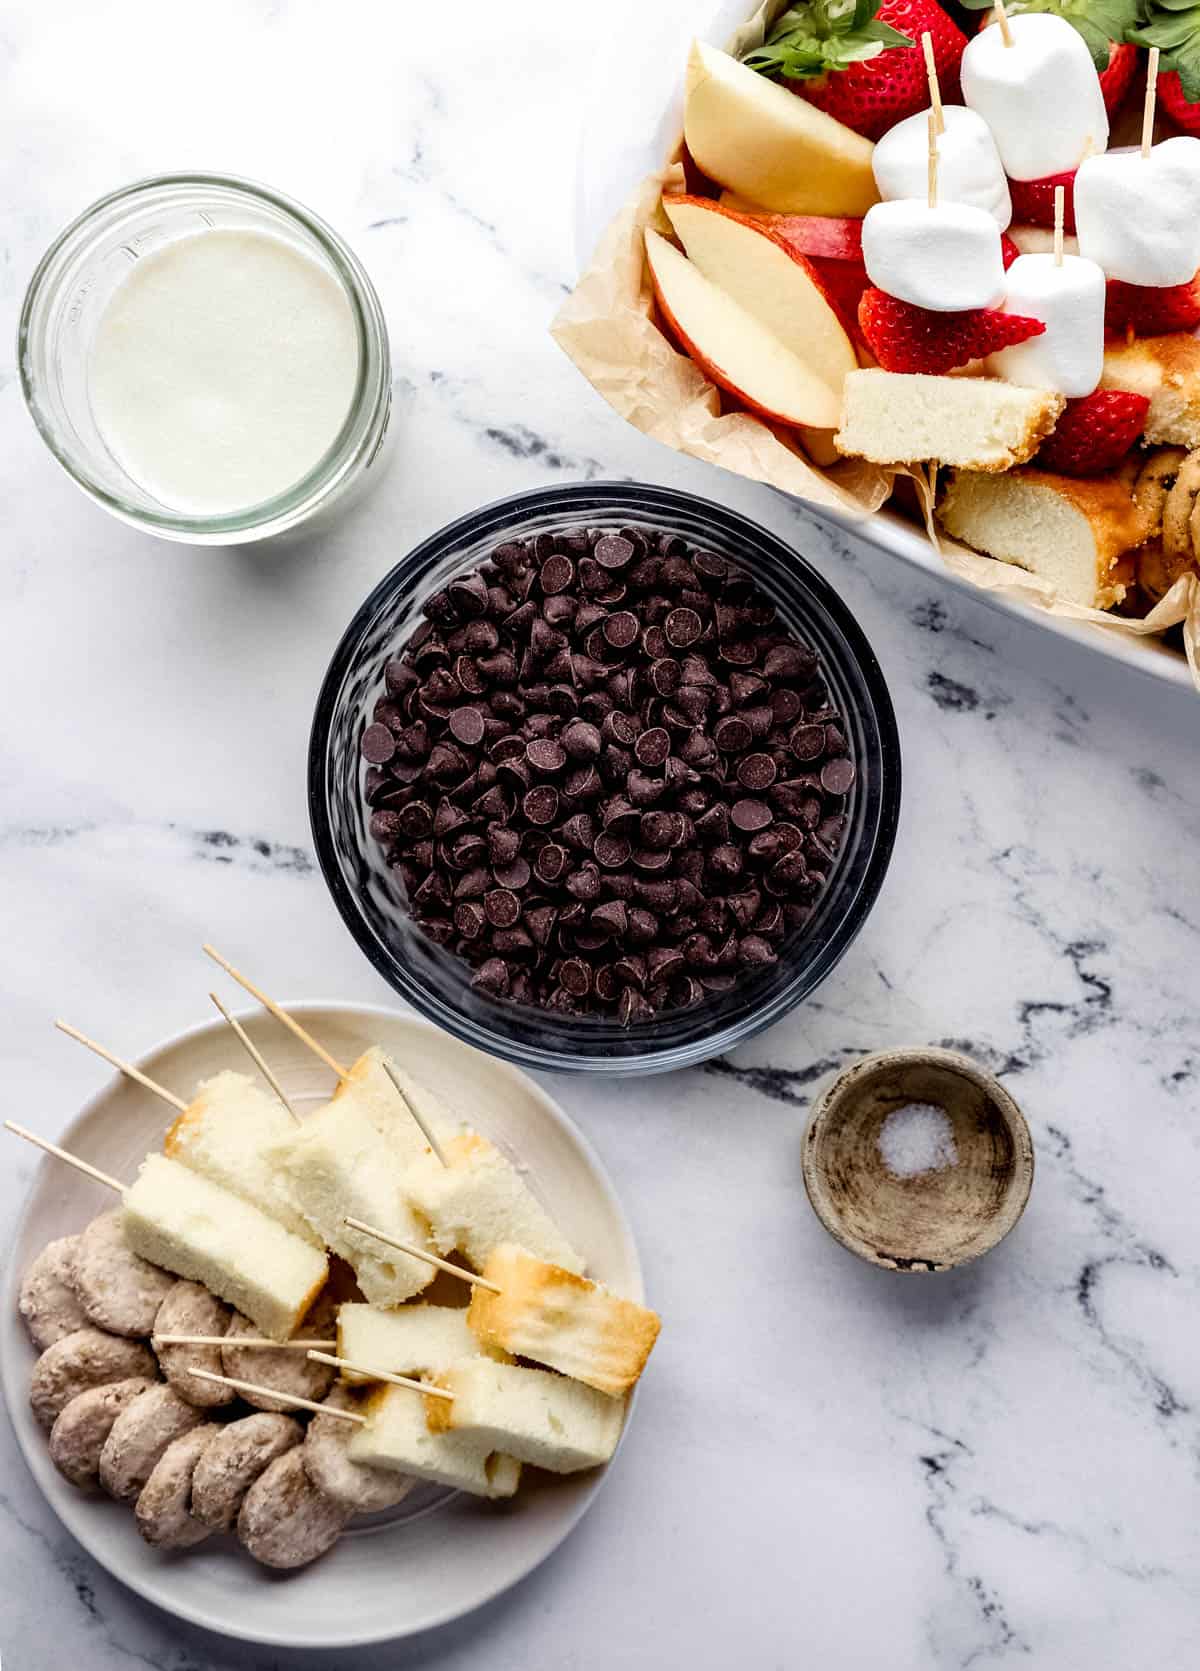 Overhead view of ingredients needed to make chocolate fondue in separate bowls on marble surface. 